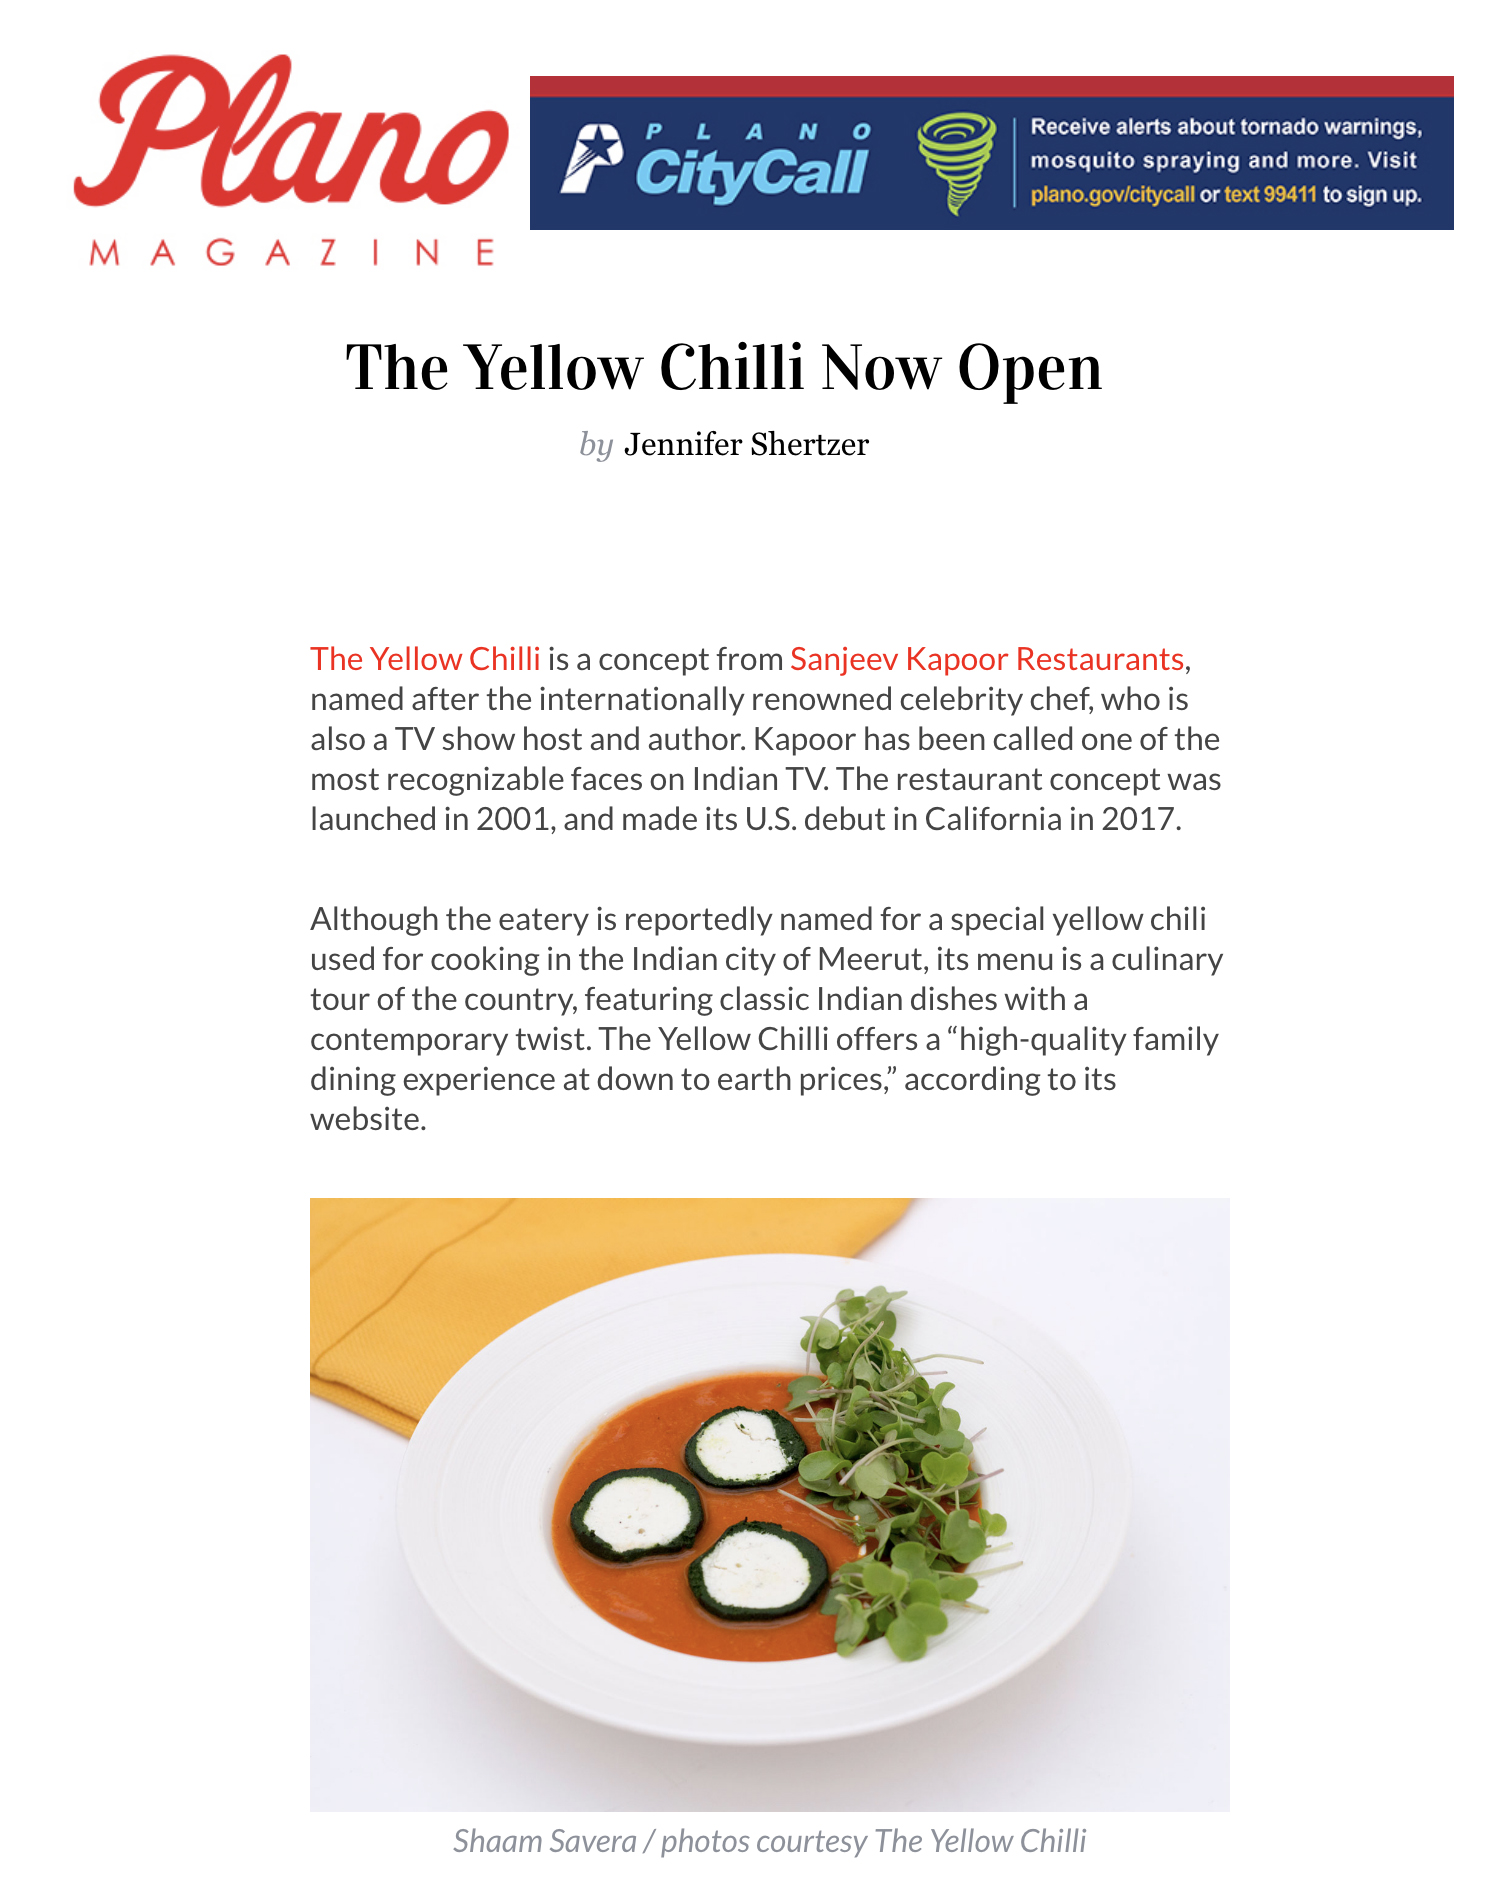 The Yellow Chilli Now Open